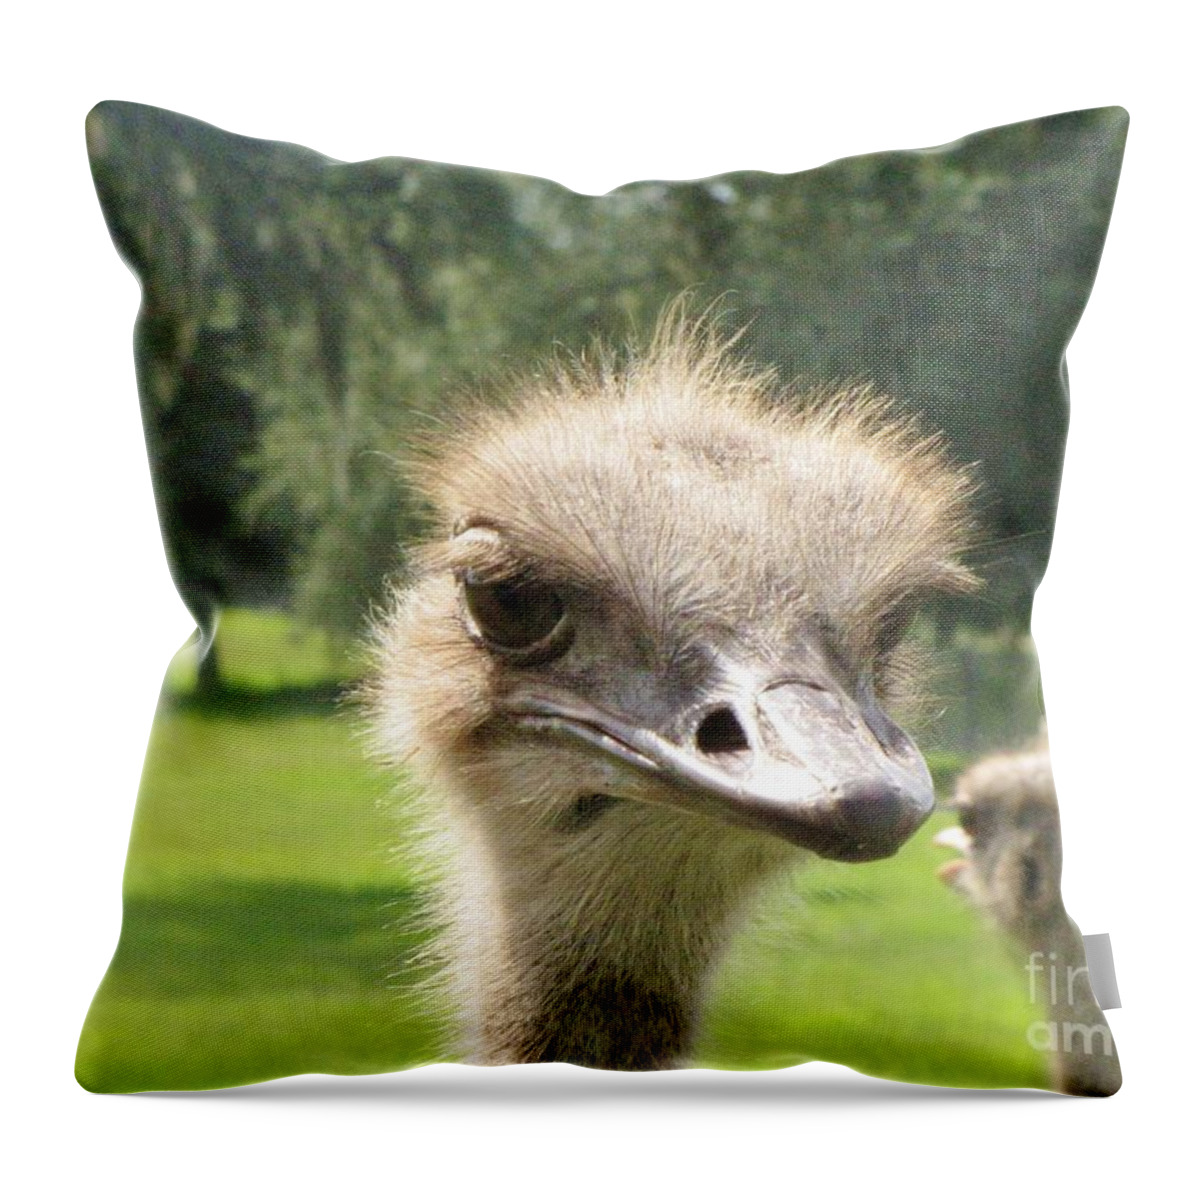 African Flightless Bird Throw Pillow featuring the photograph Hmmm by World Reflections By Sharon